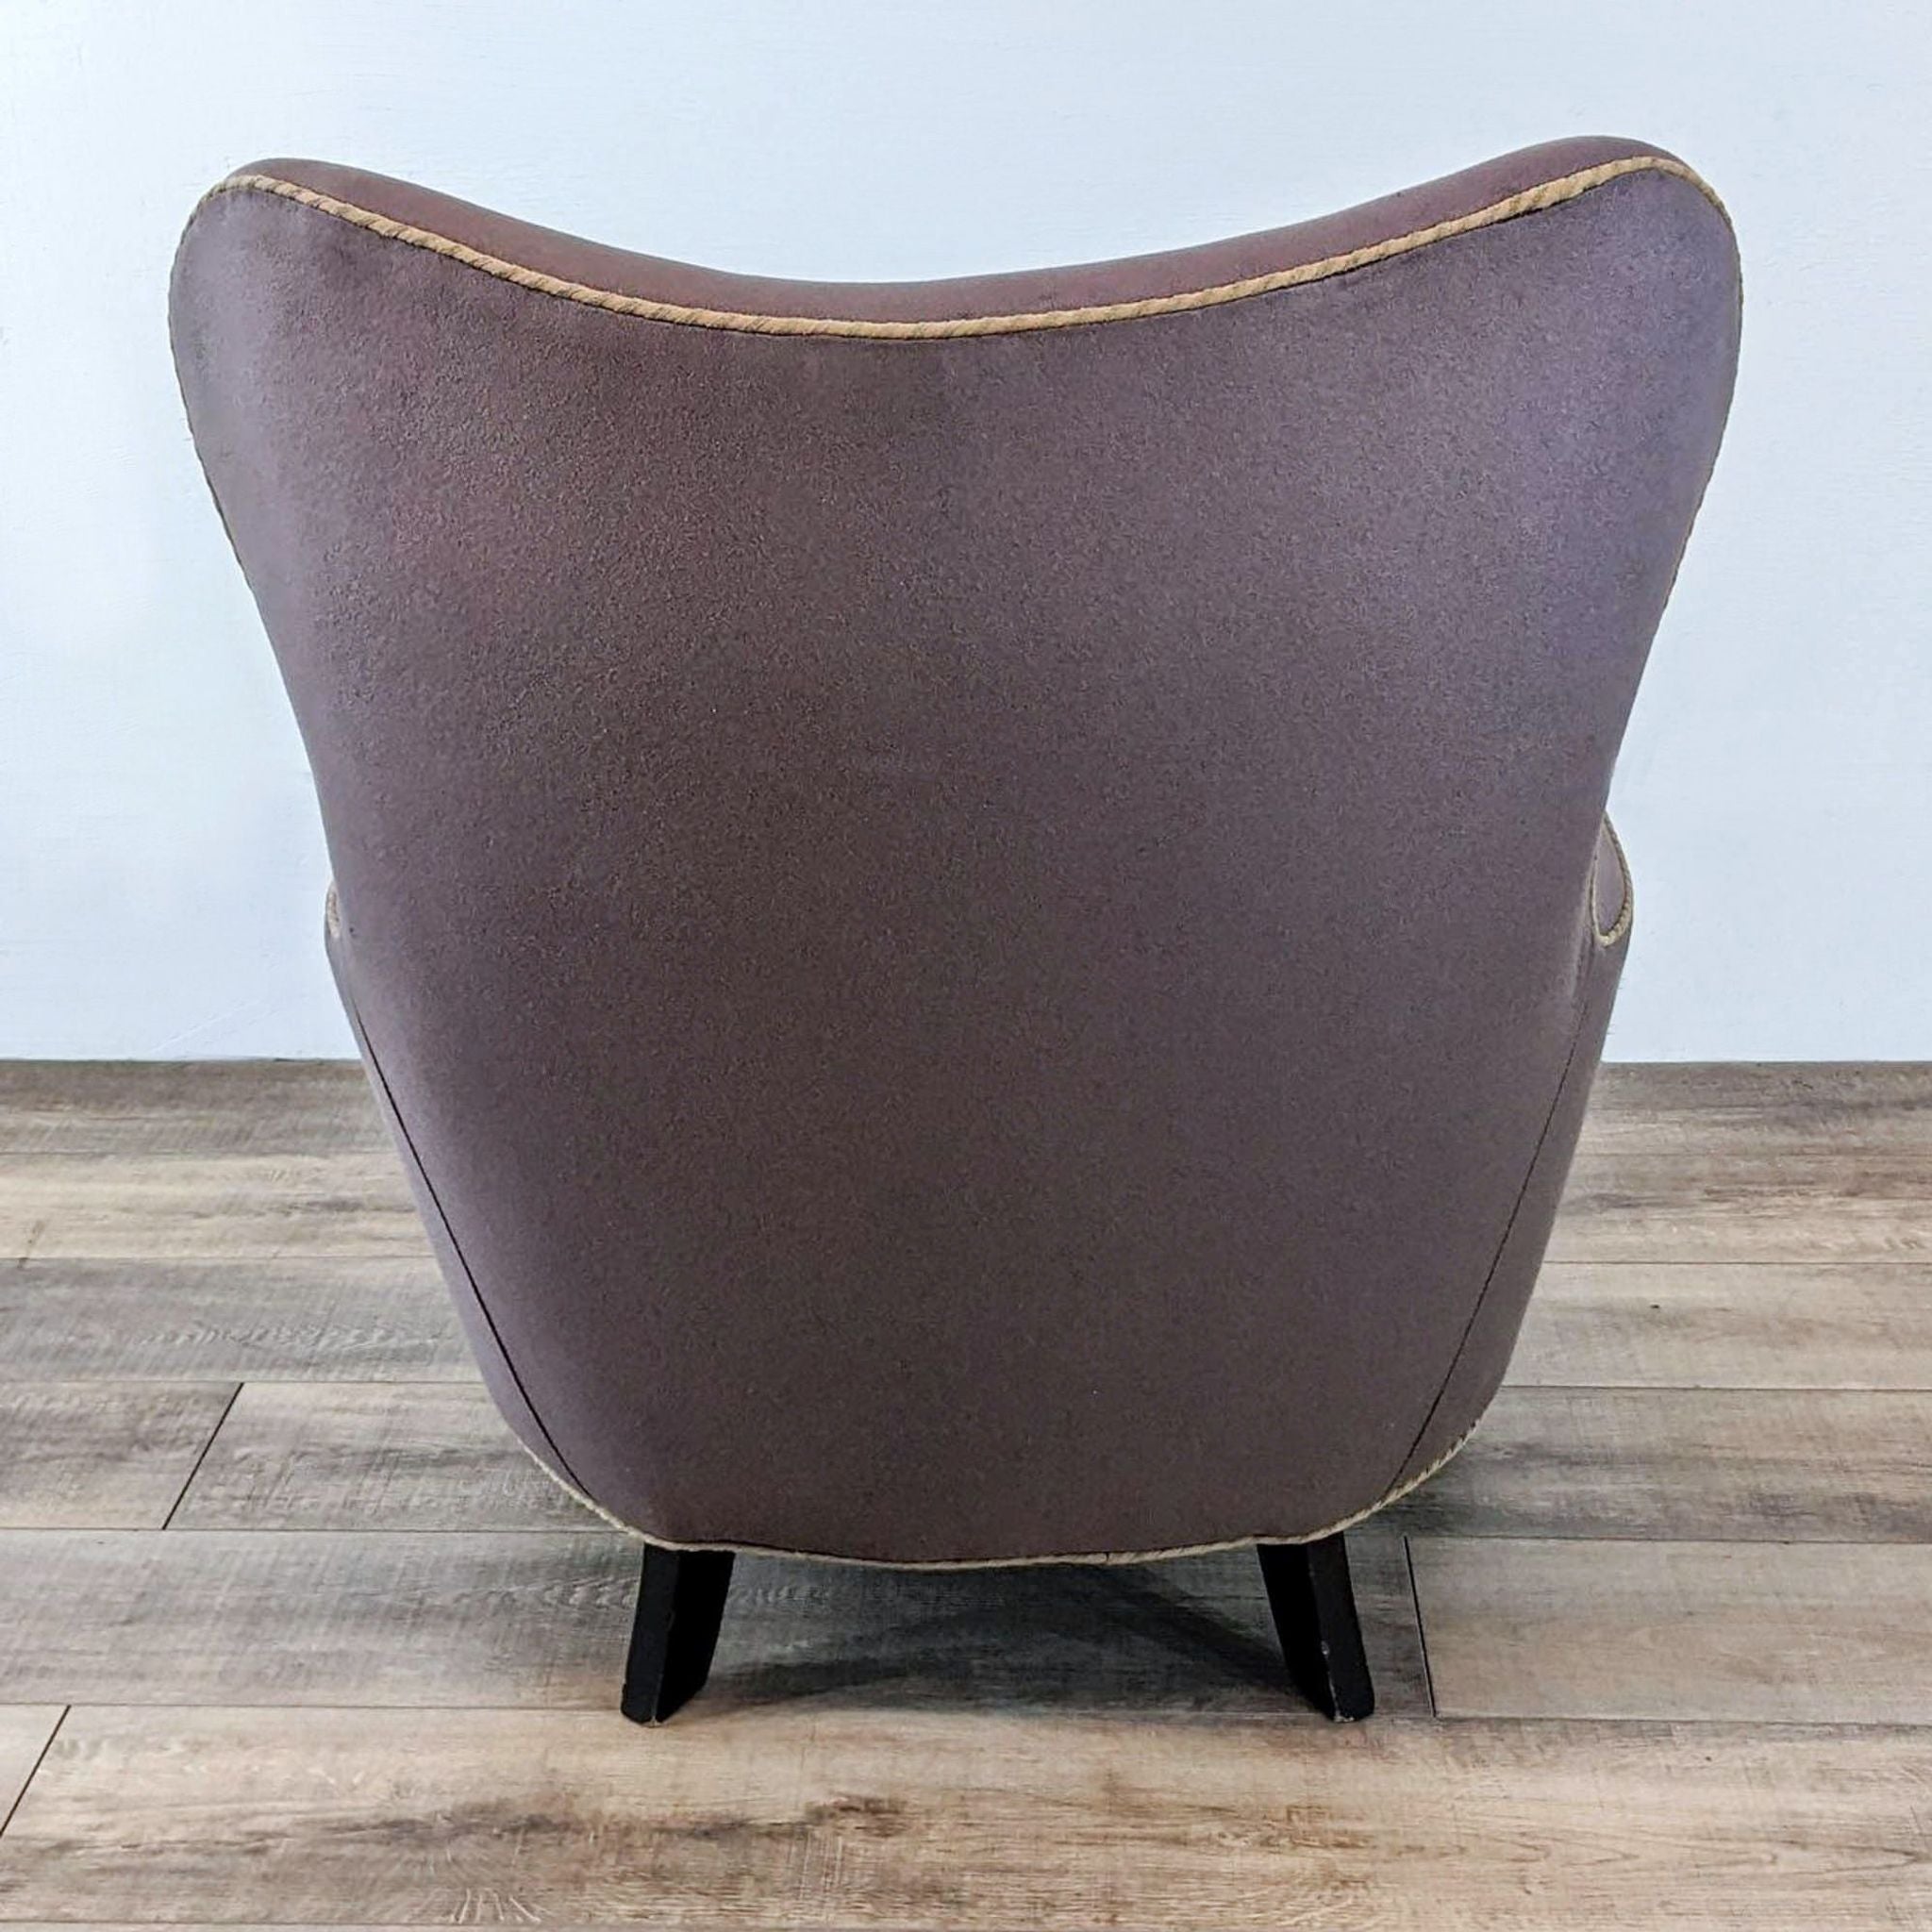 Rear view of a RomI mini chair by Cisco Brothers, showing curved lines with contrasting piping and boot casters.